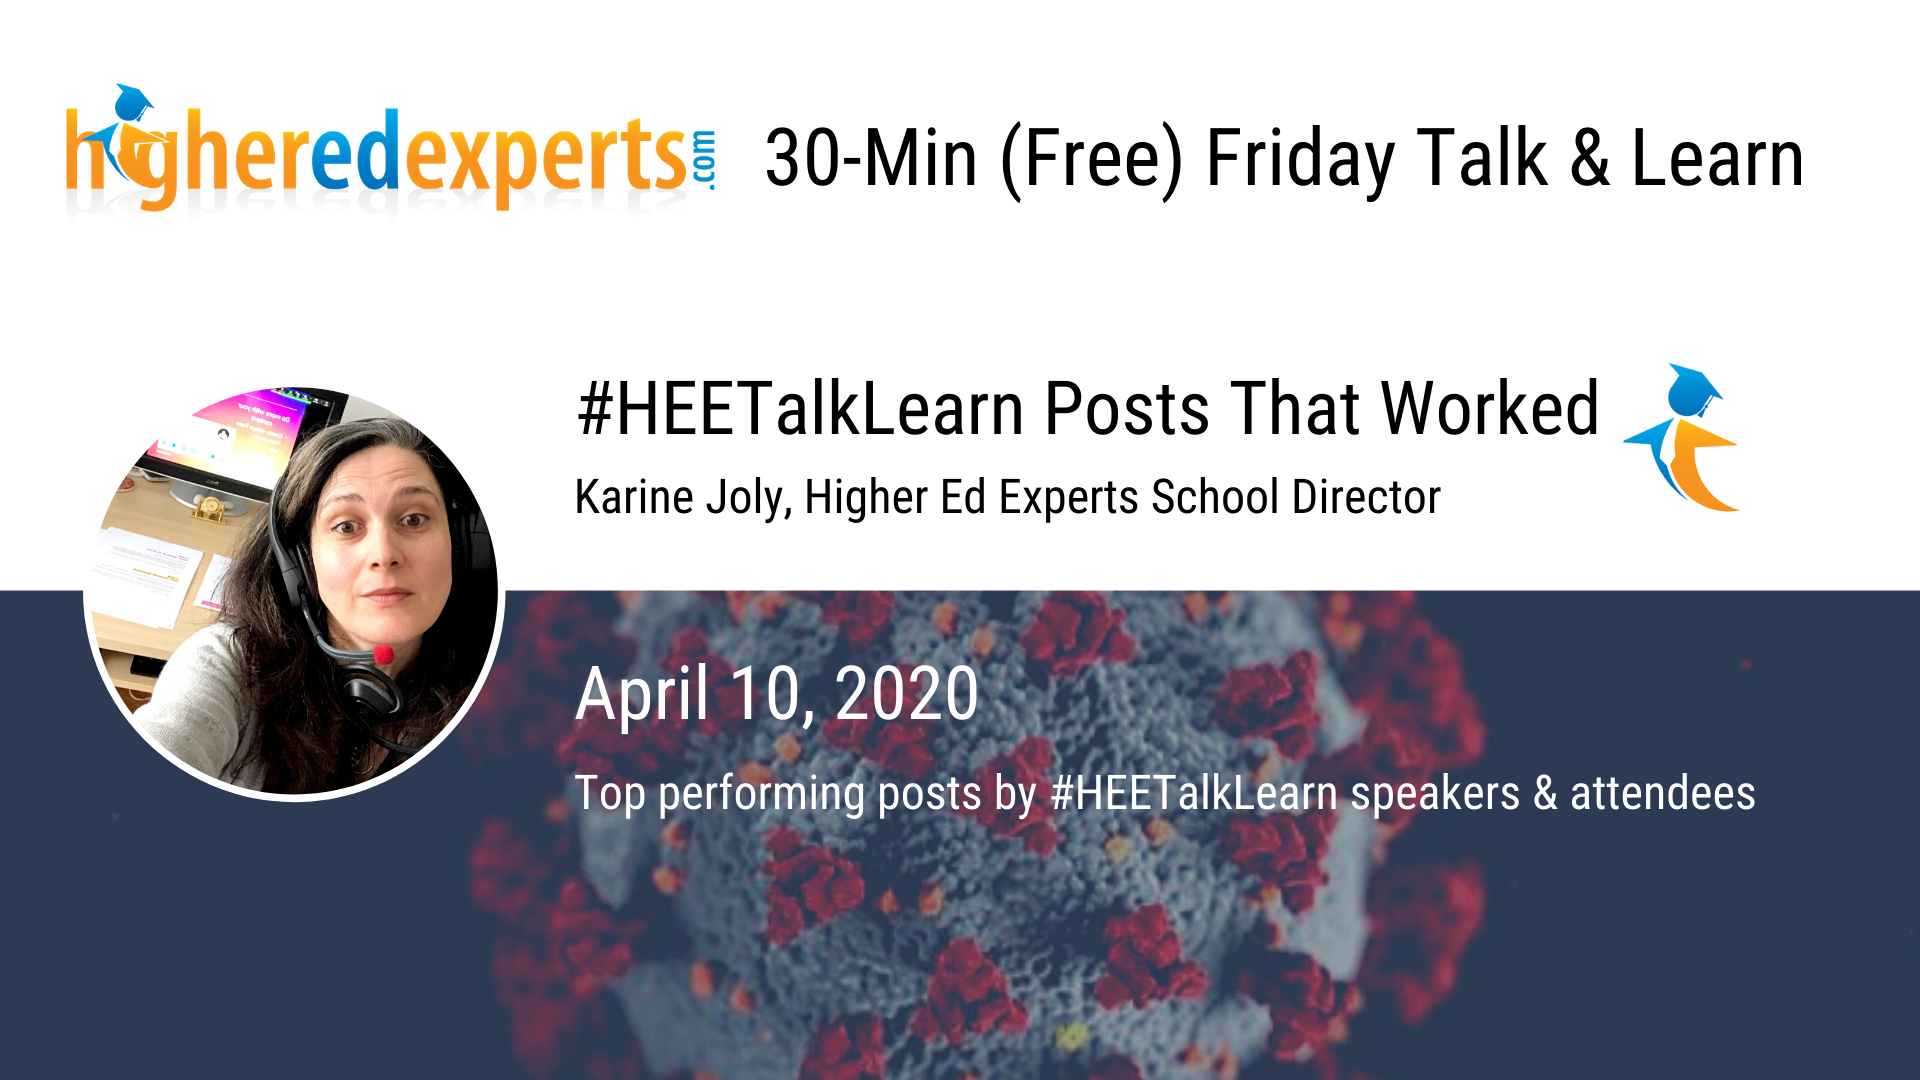 #HEETalkLearn Posts that Worked (April 10, 2020): Remote Takeovers, Favorite Recipes, Quarantine Houses